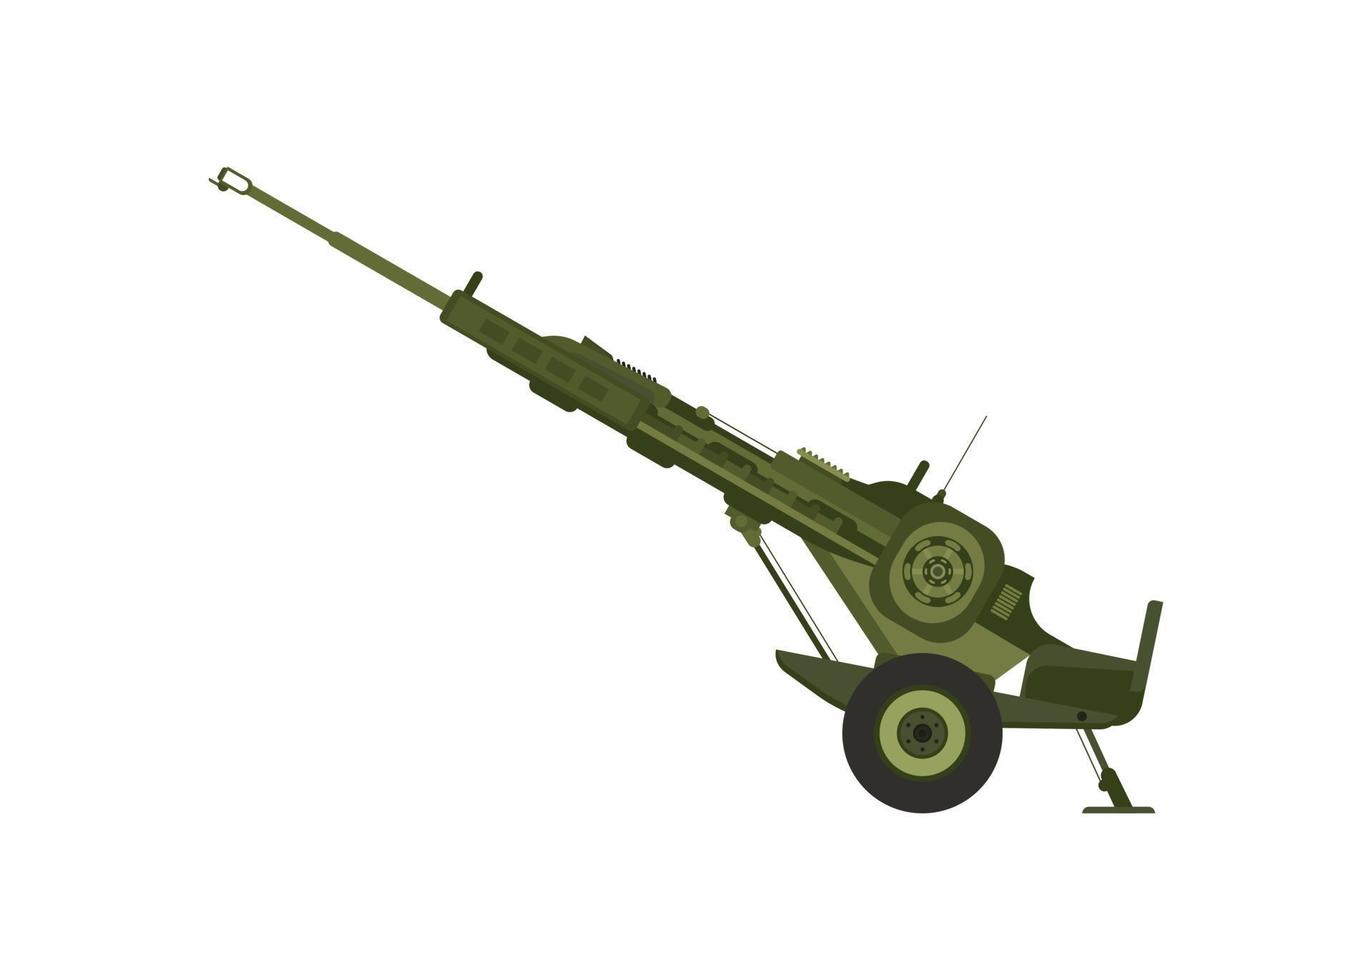 Artillery gun on a white background. Isolate. It can be enlarged and used as a background or texture. vector